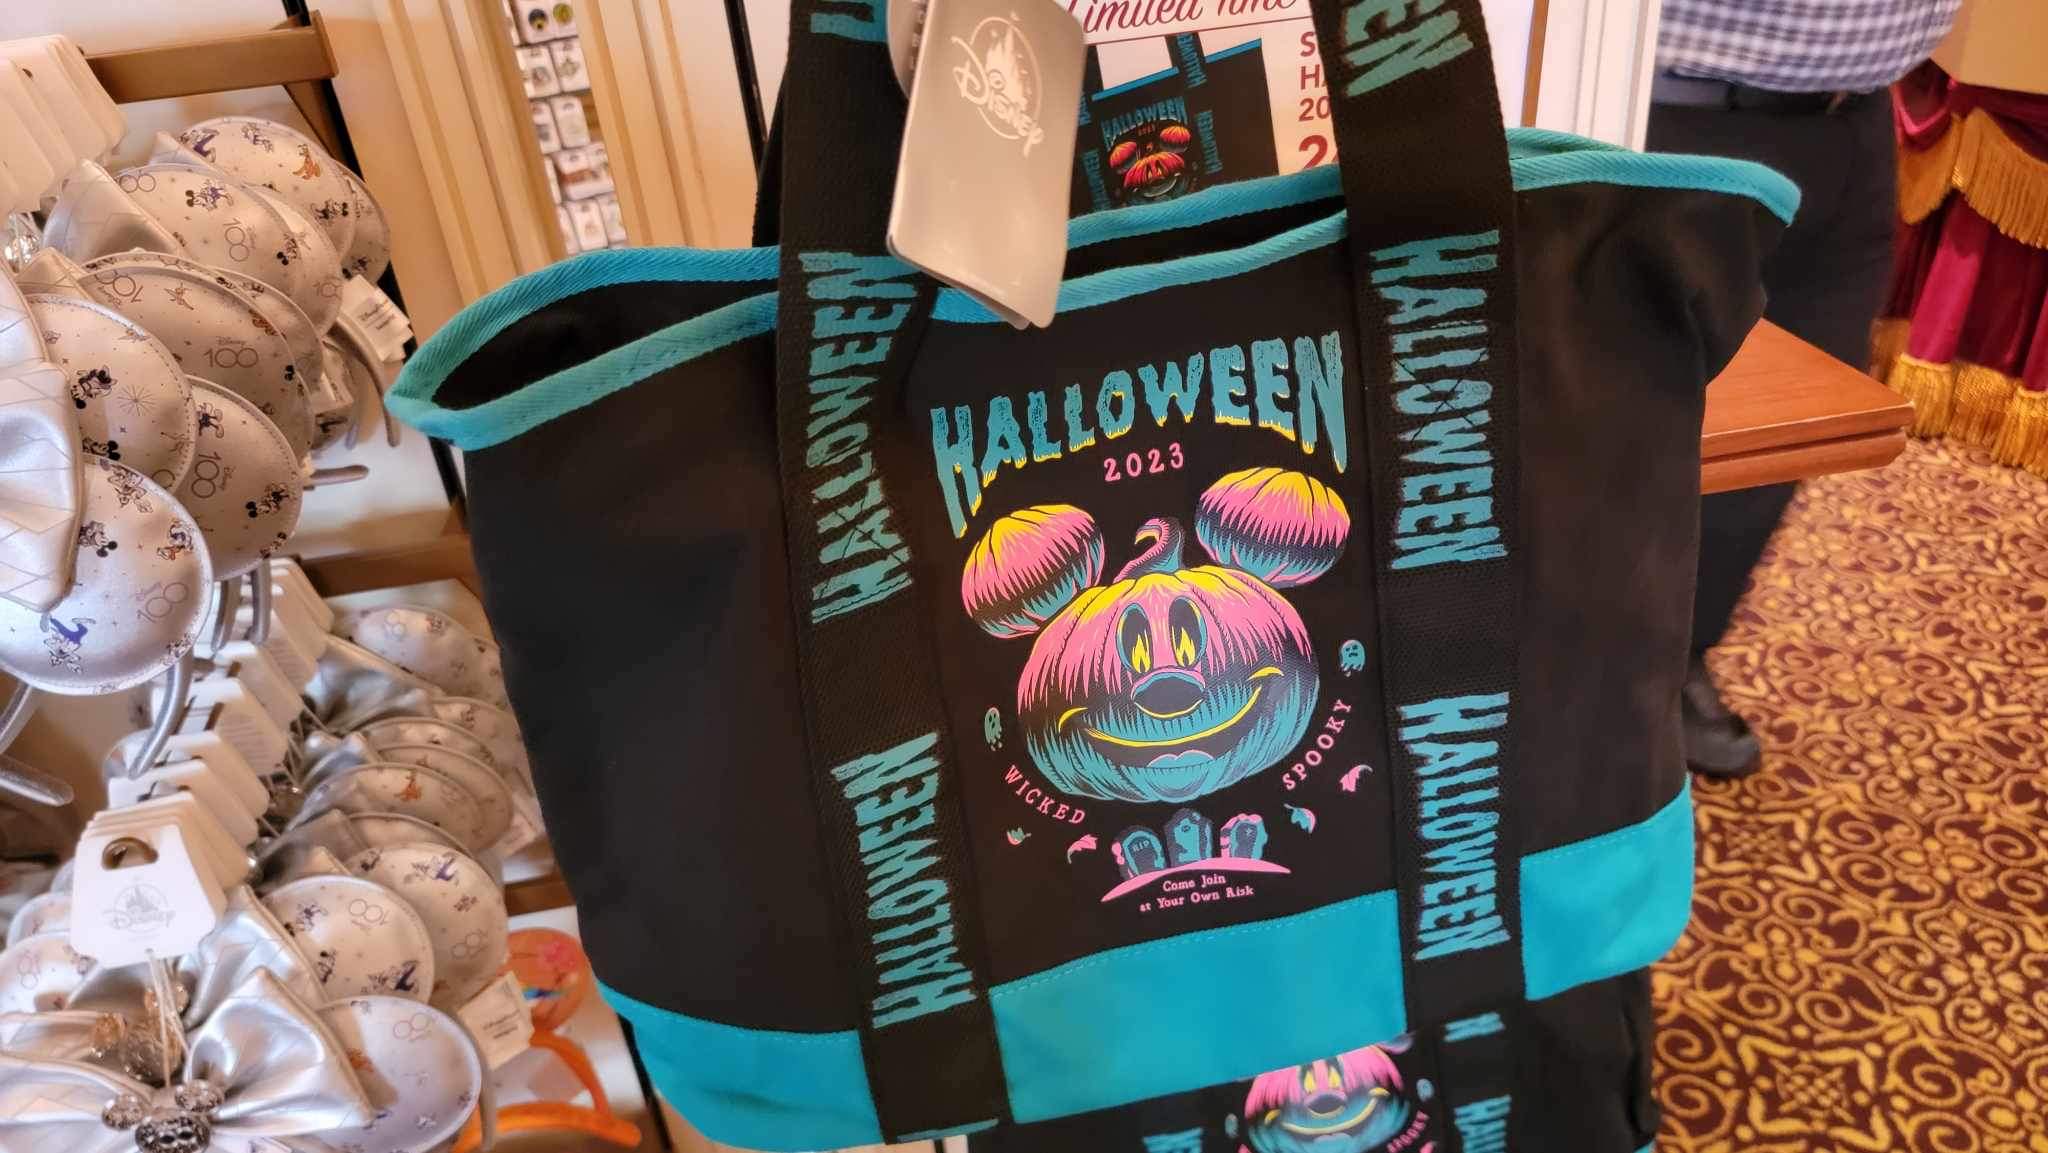 Mickey Mouse Halloween Glow-in-the-Dark Tote Bag